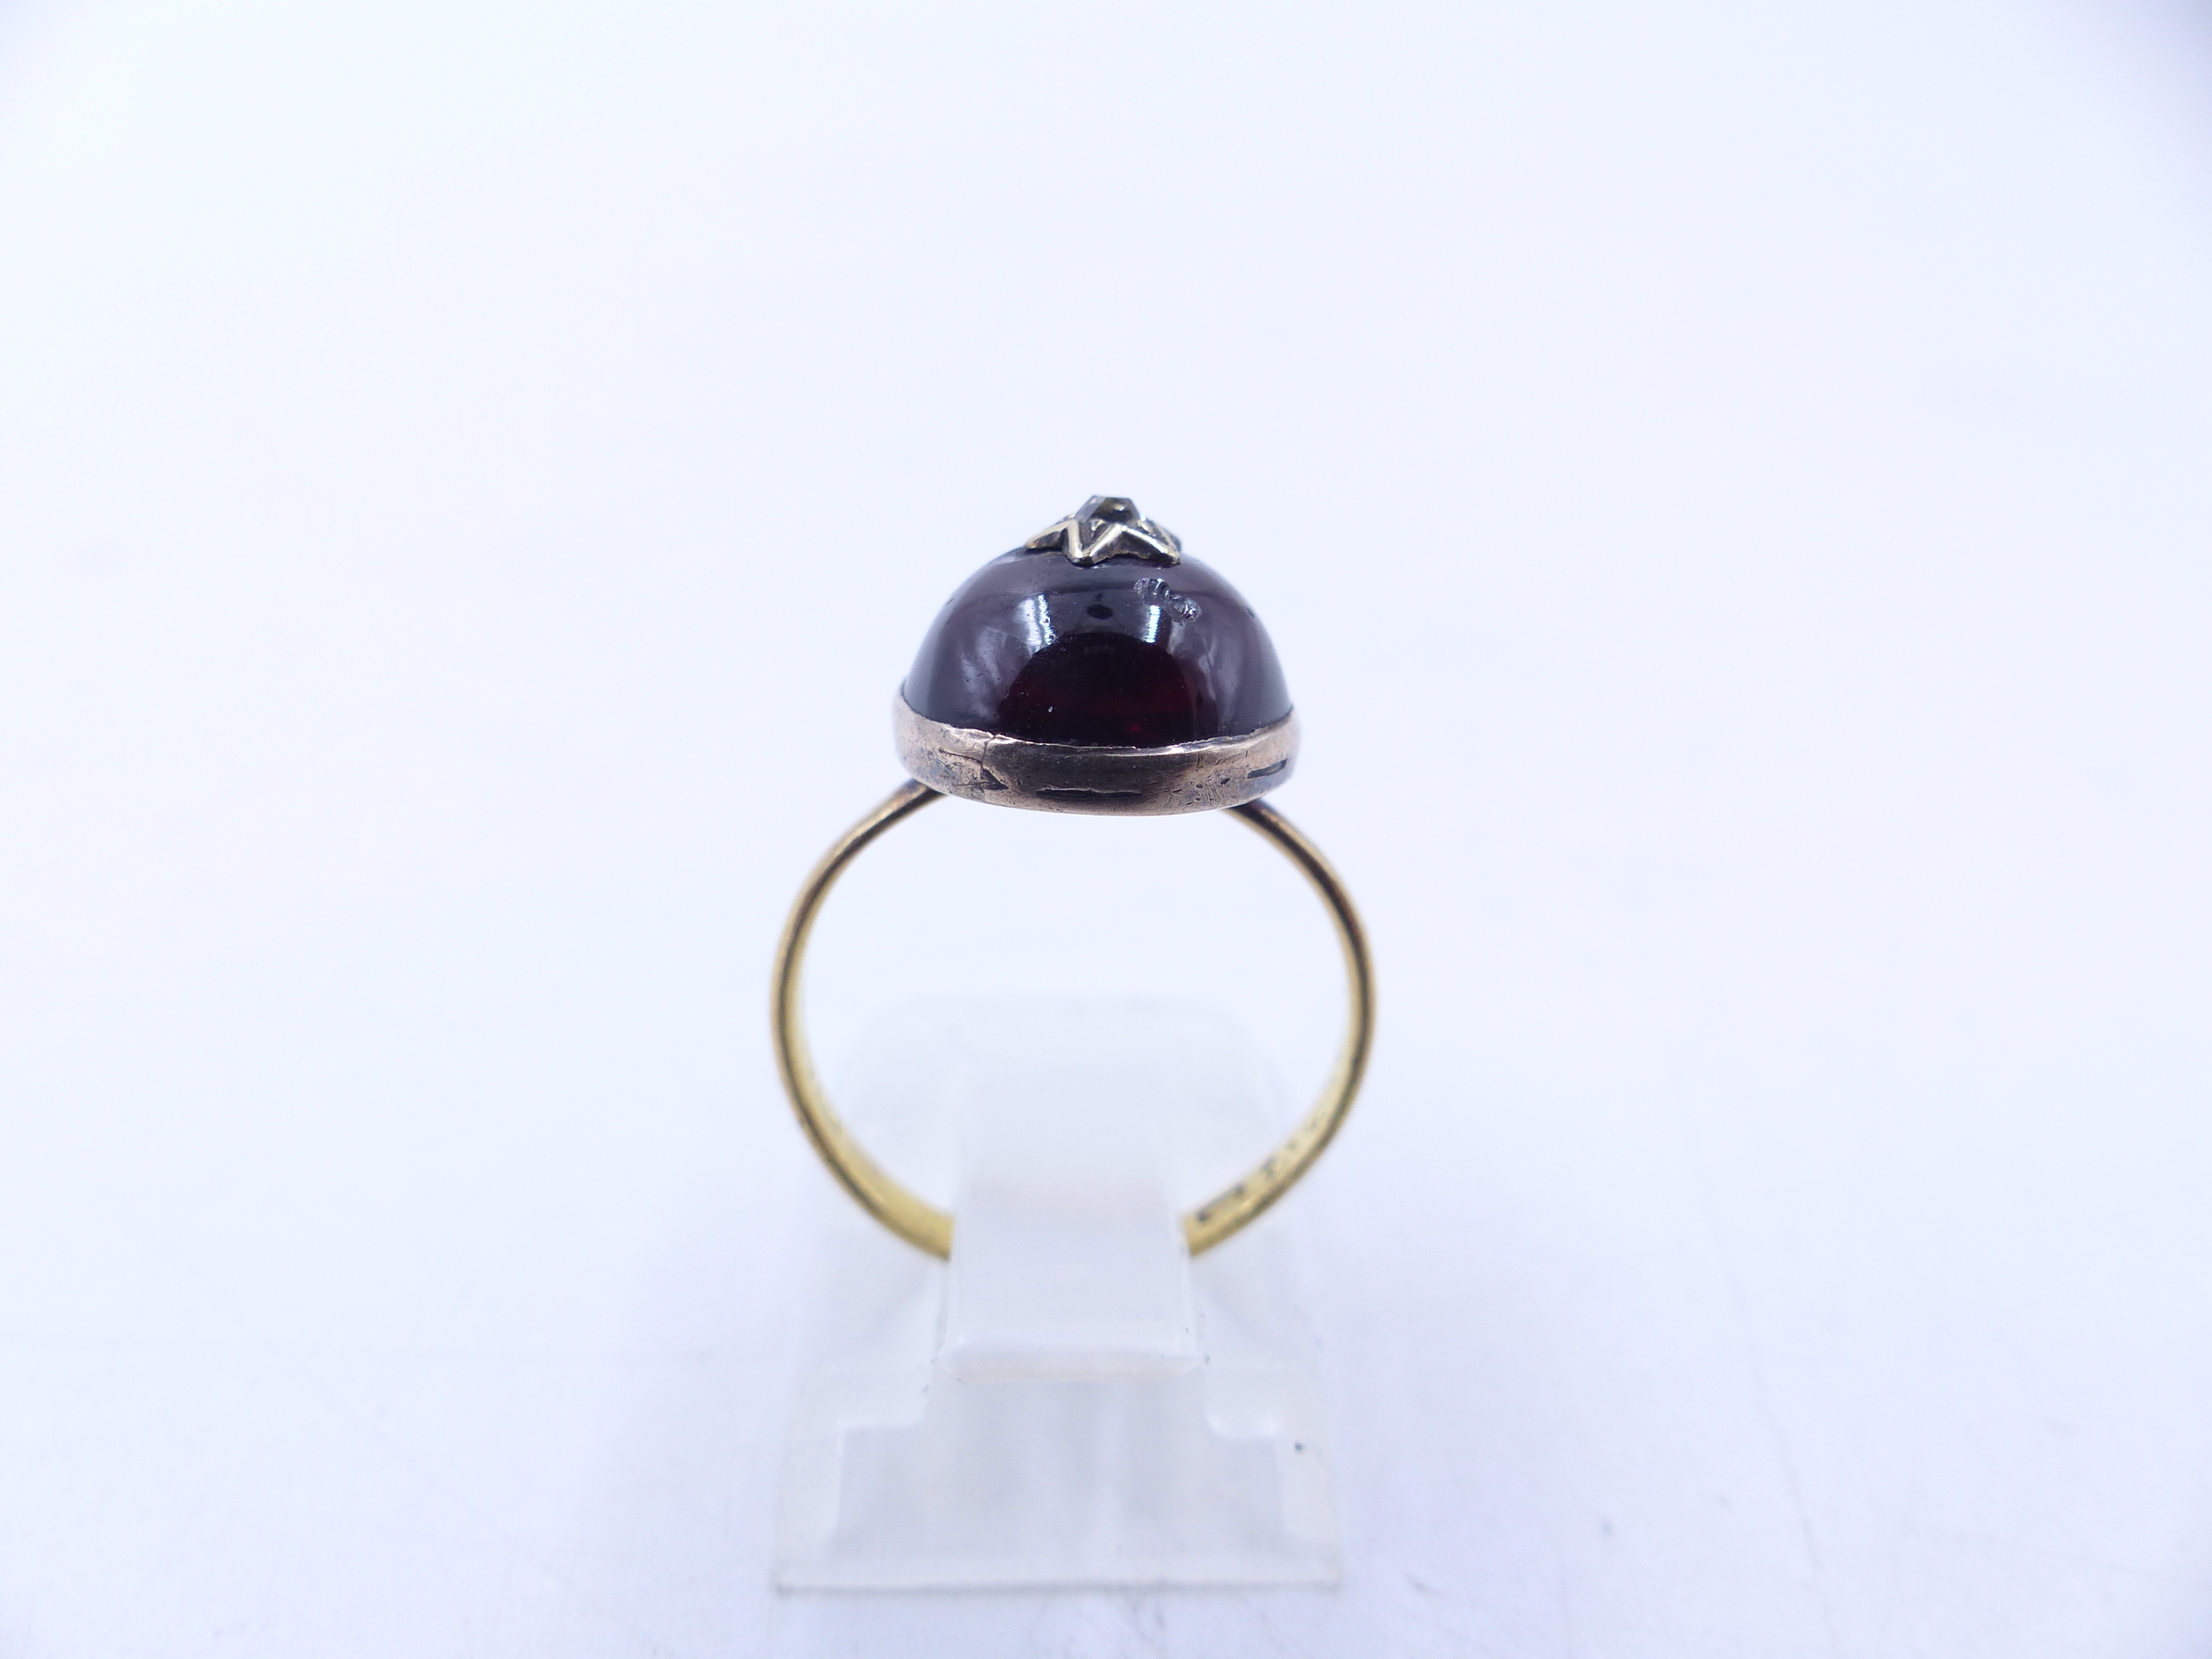 AN ANTIQUE 22ct YELLOW GOLD CABOCHON GARNET AND OLD CUT DIAMOND STAR BURST RING. FINGER SIZE J. - Image 4 of 9